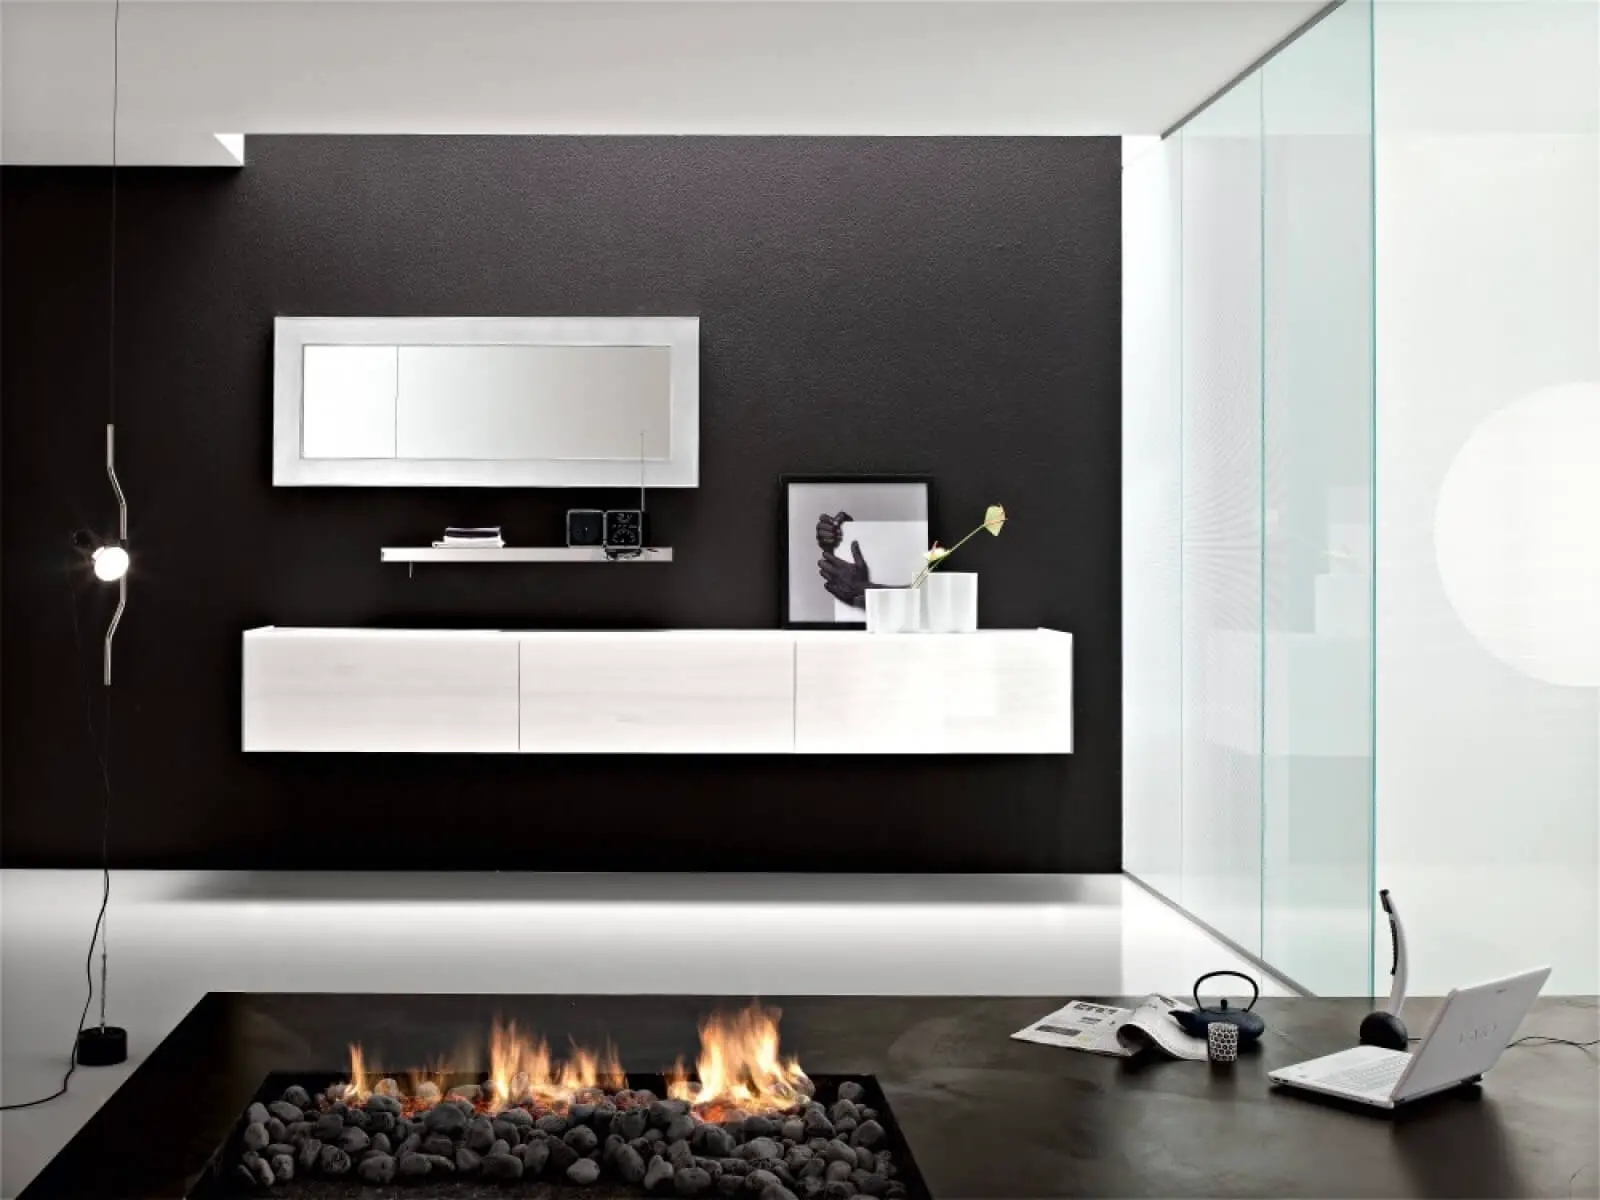 Bathroom with black hardwood furniture and a fireplace